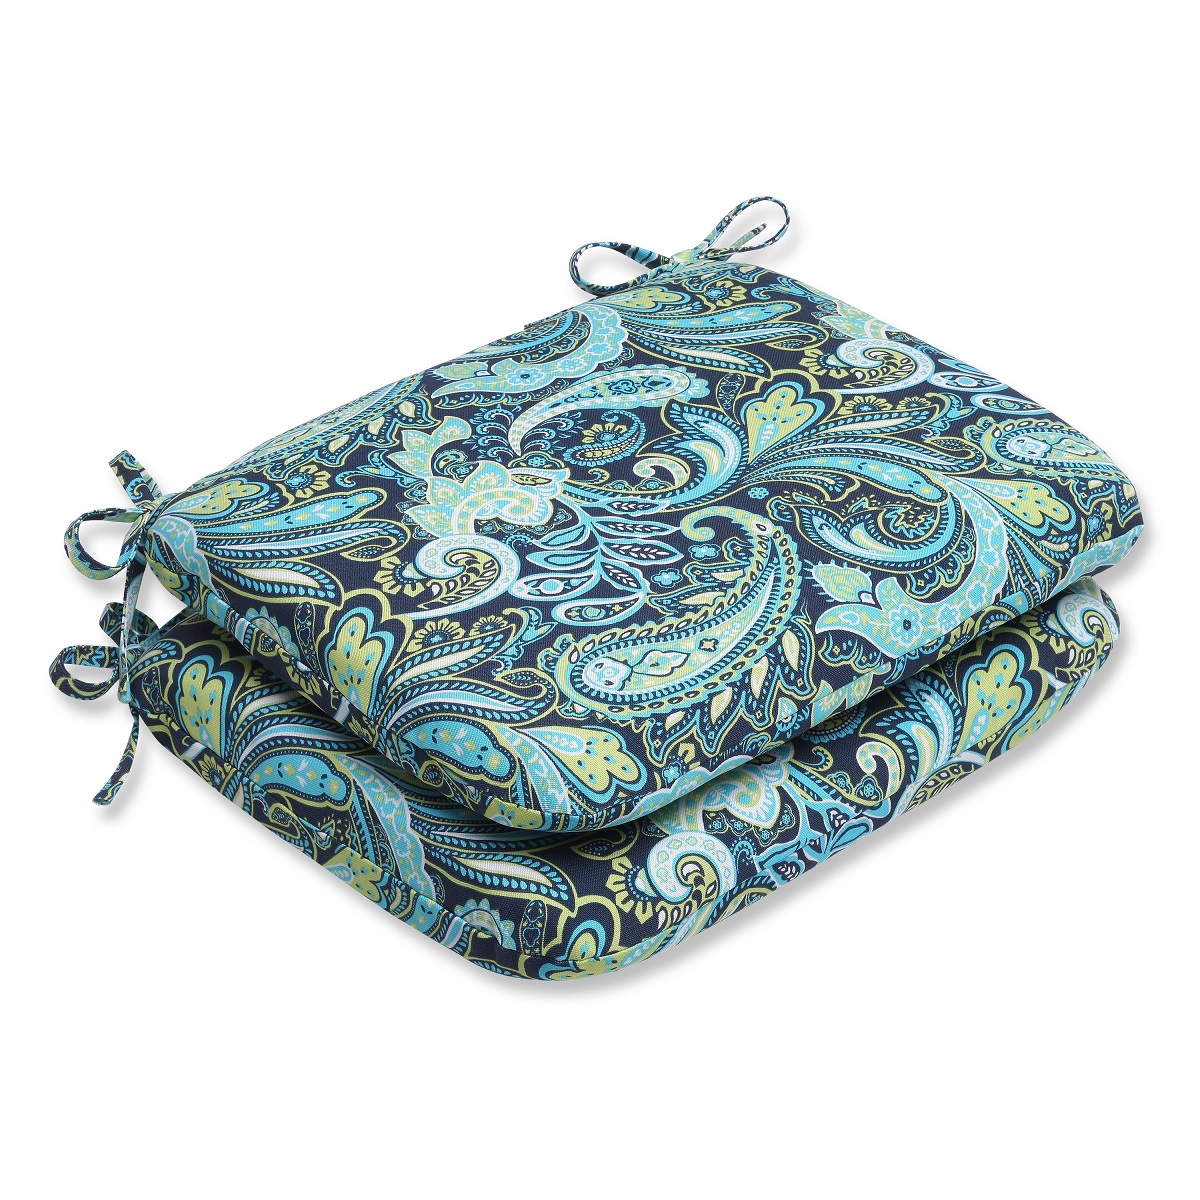 Pillow Perfect Set of 2 Blue and Green Paisley Outdoor Patio Rounded Chair Cushions 18.5"